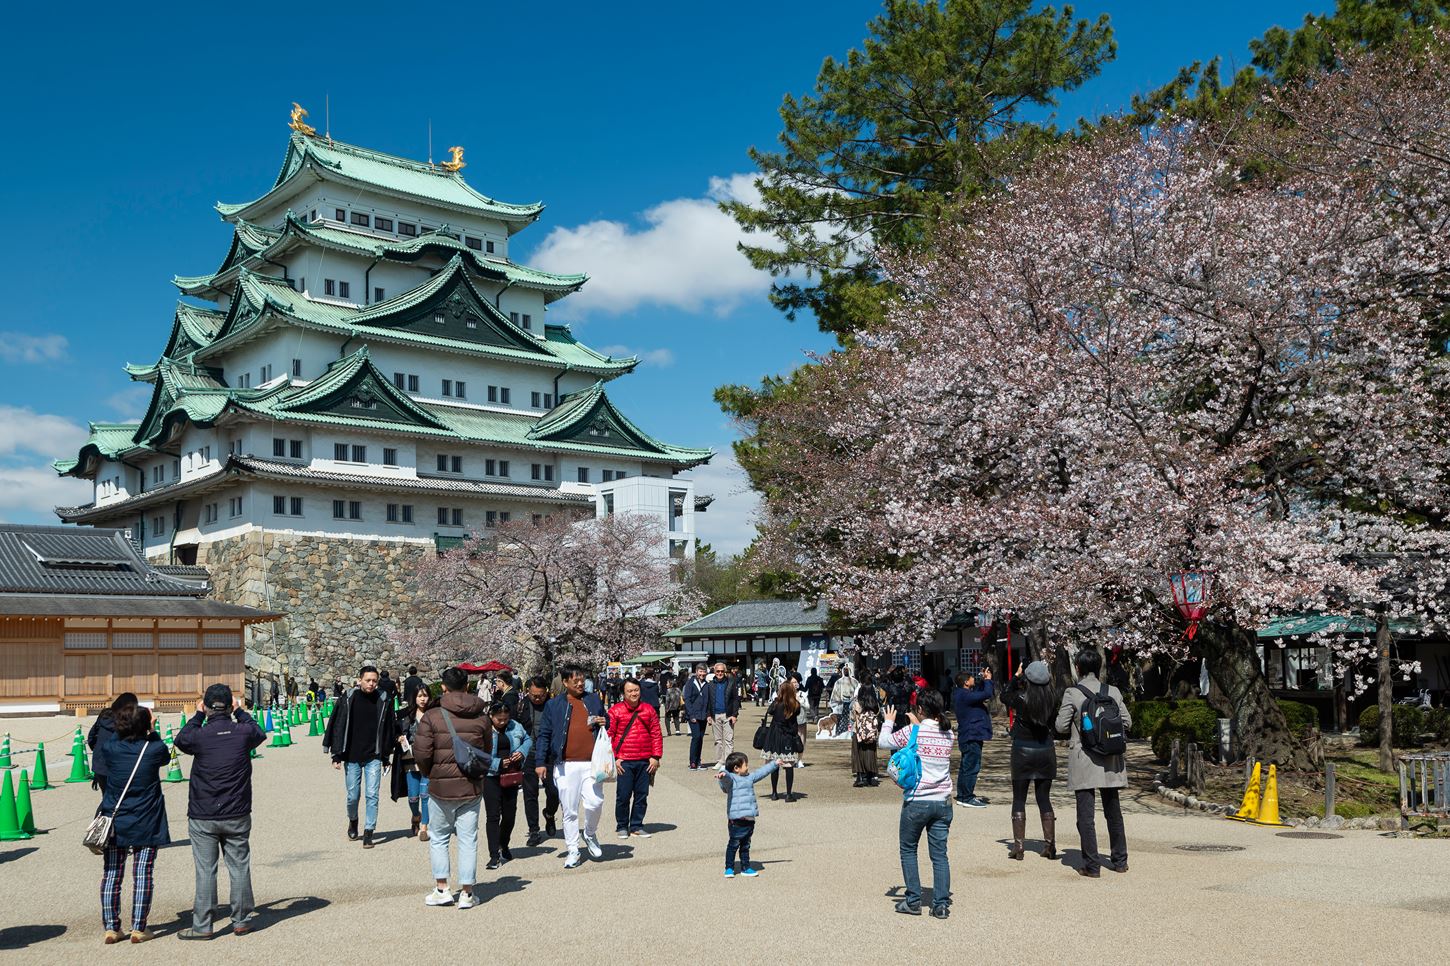 Sightseeing scenery that simply shows the weather in Nagoya in April2